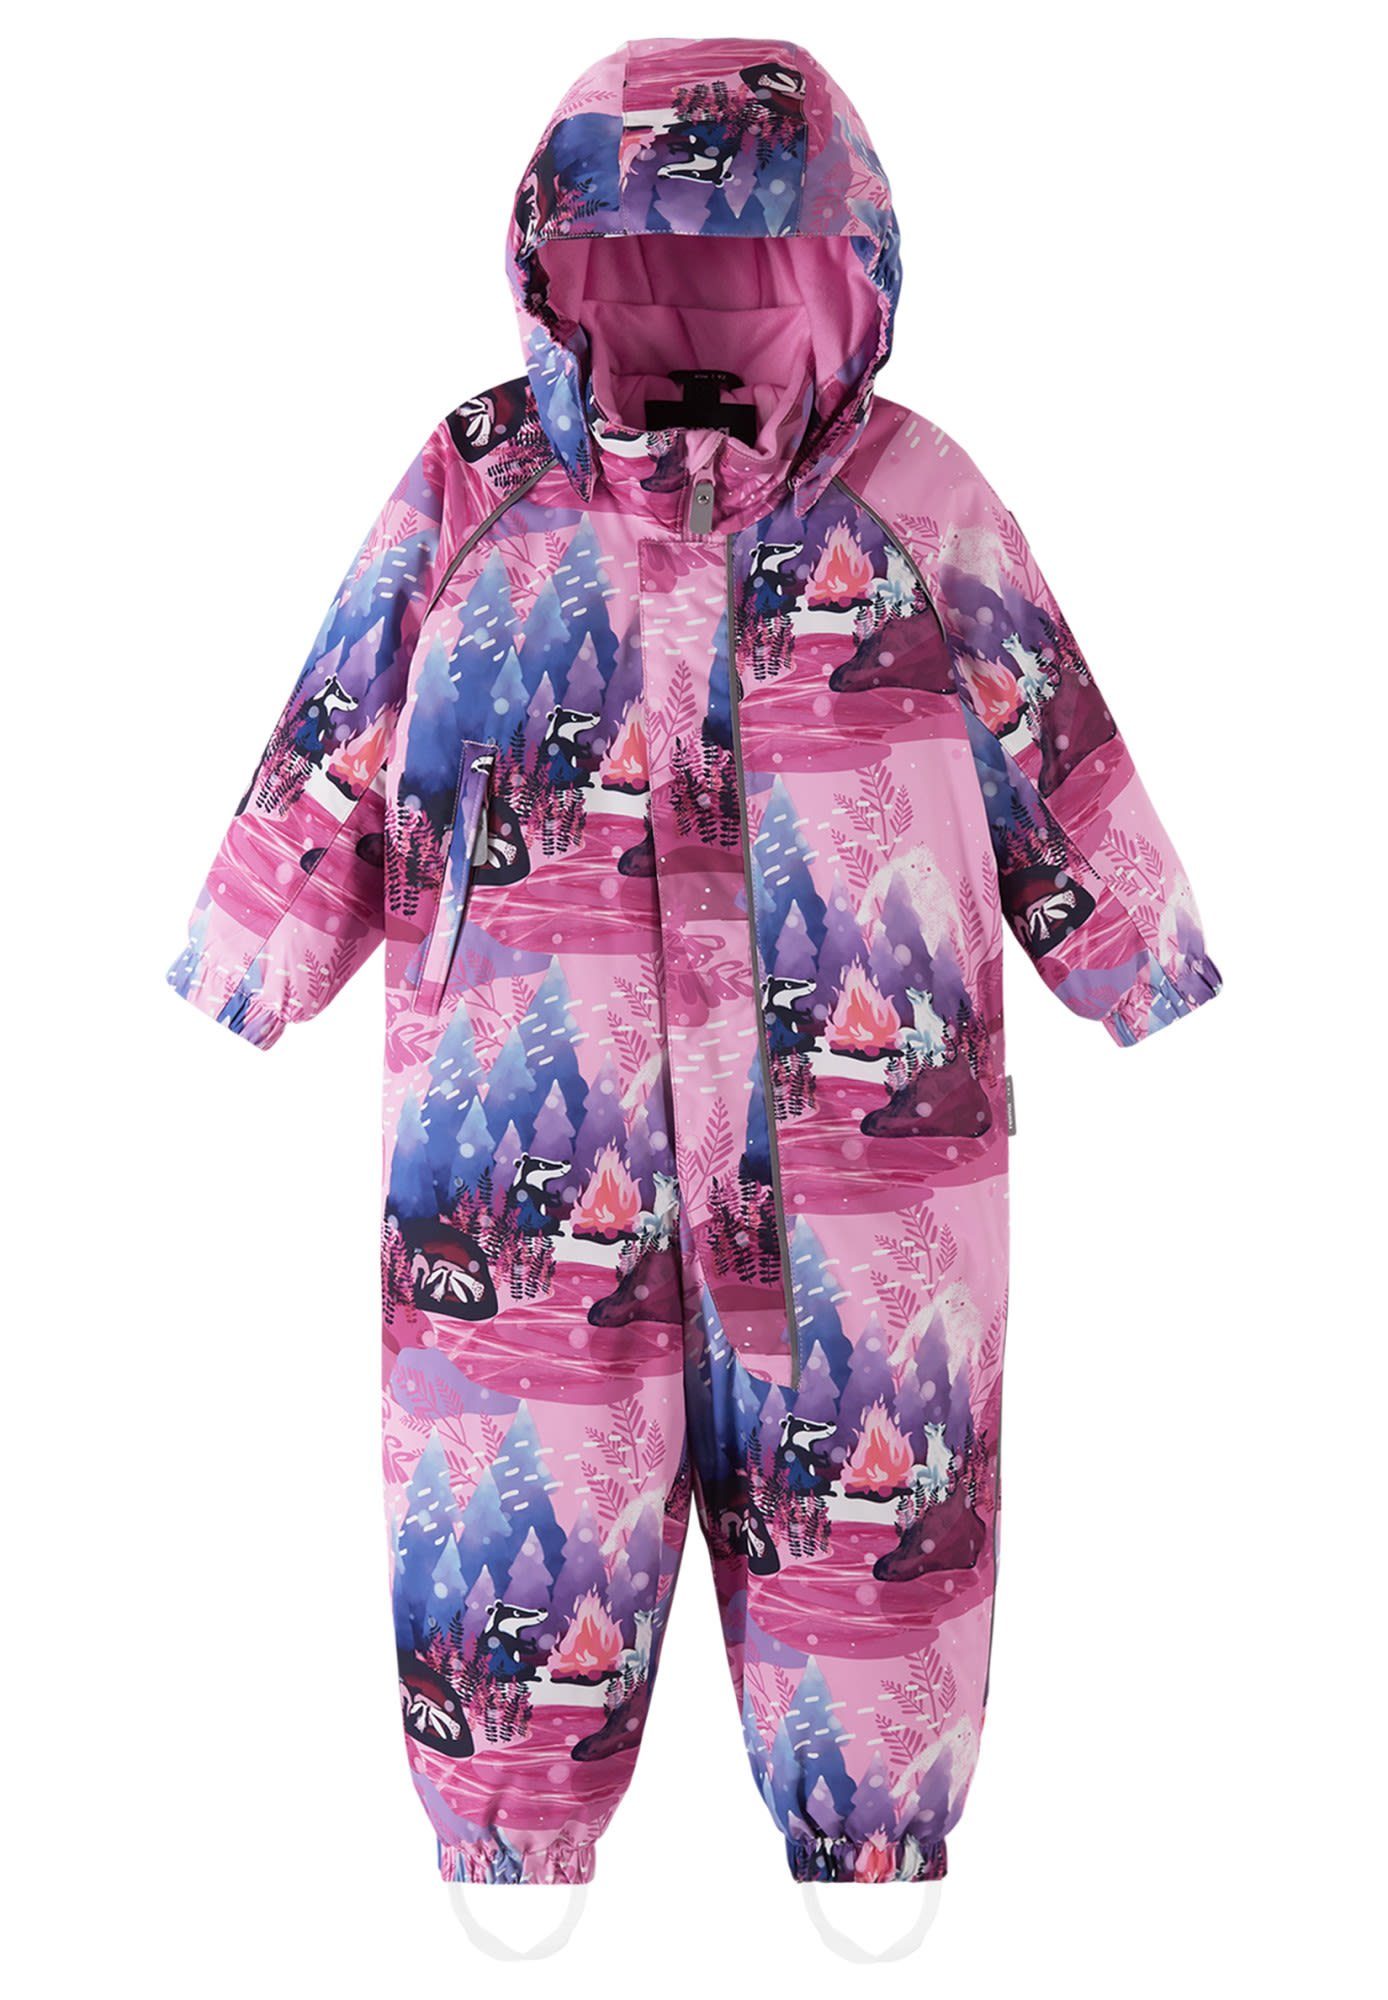 Classic reima Reima Kinder Overall Toddlers Pink Winter Overall Langnes